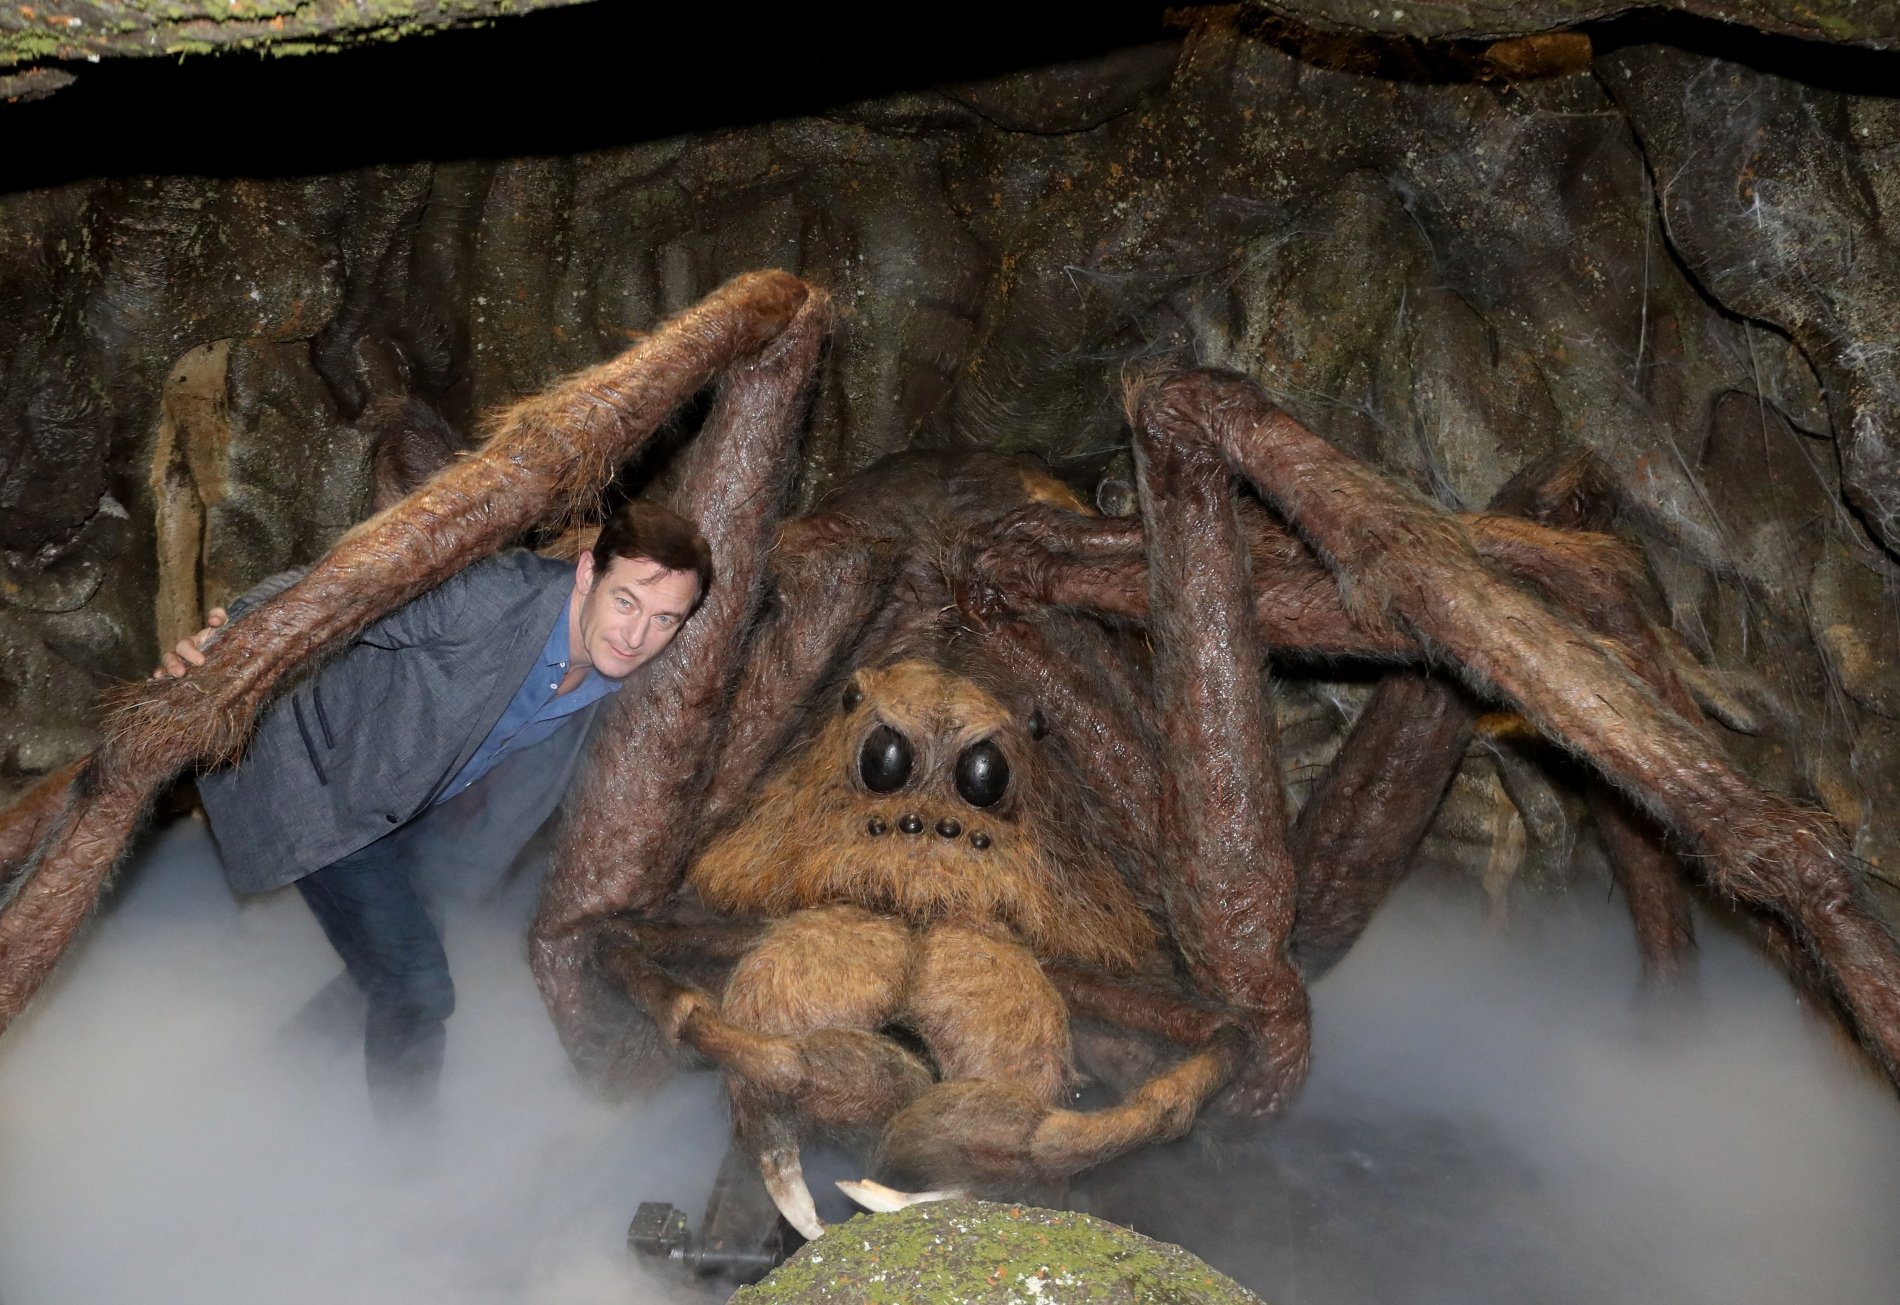 Jason Isaacs with a replica of Aragog from 'Harry Potter' at Warner Bros. London